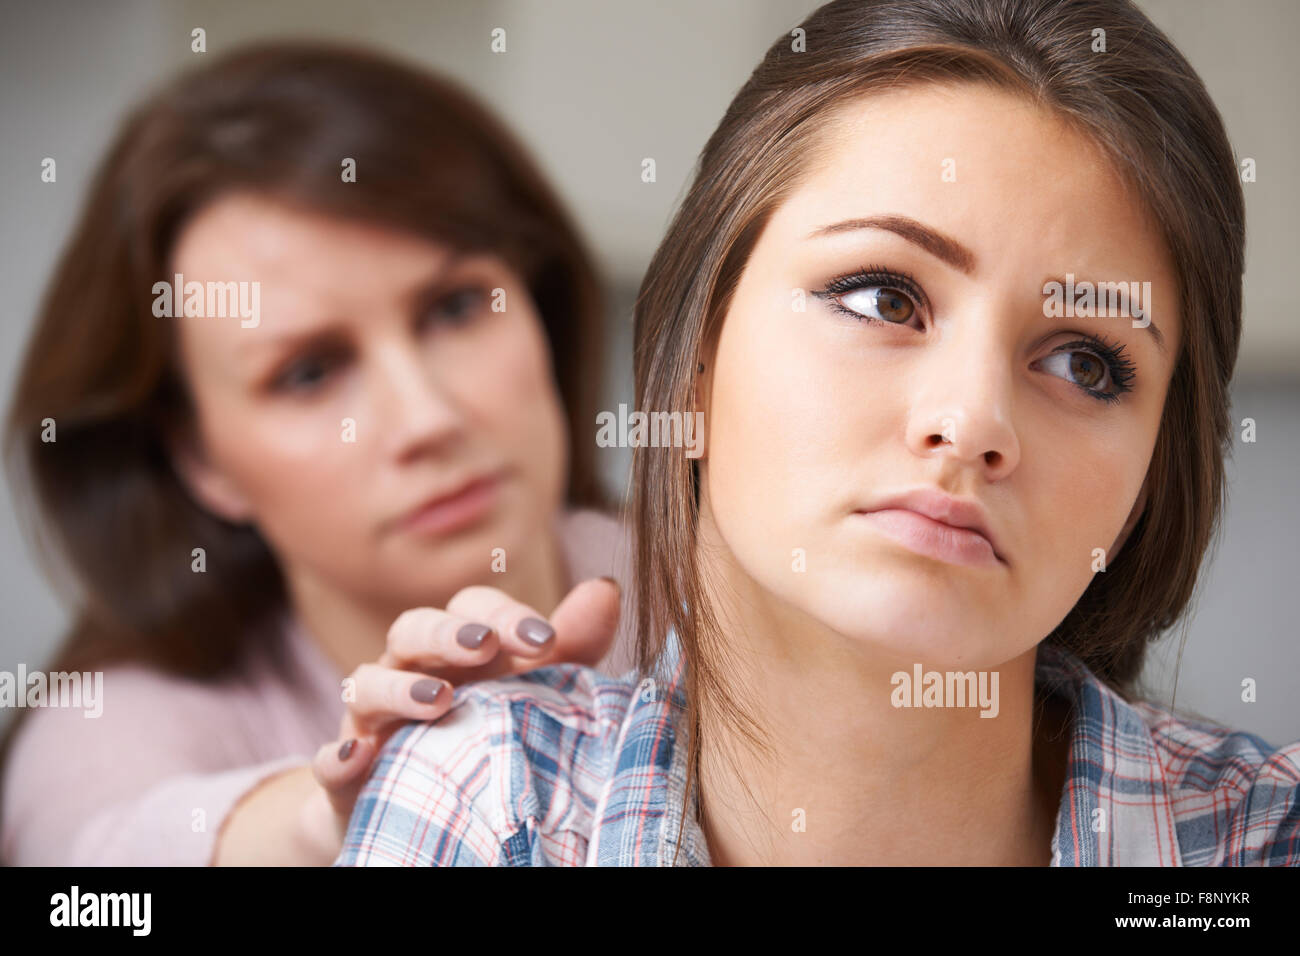 Mother Worried About Unhappy Teenage Daughter Stock Photo